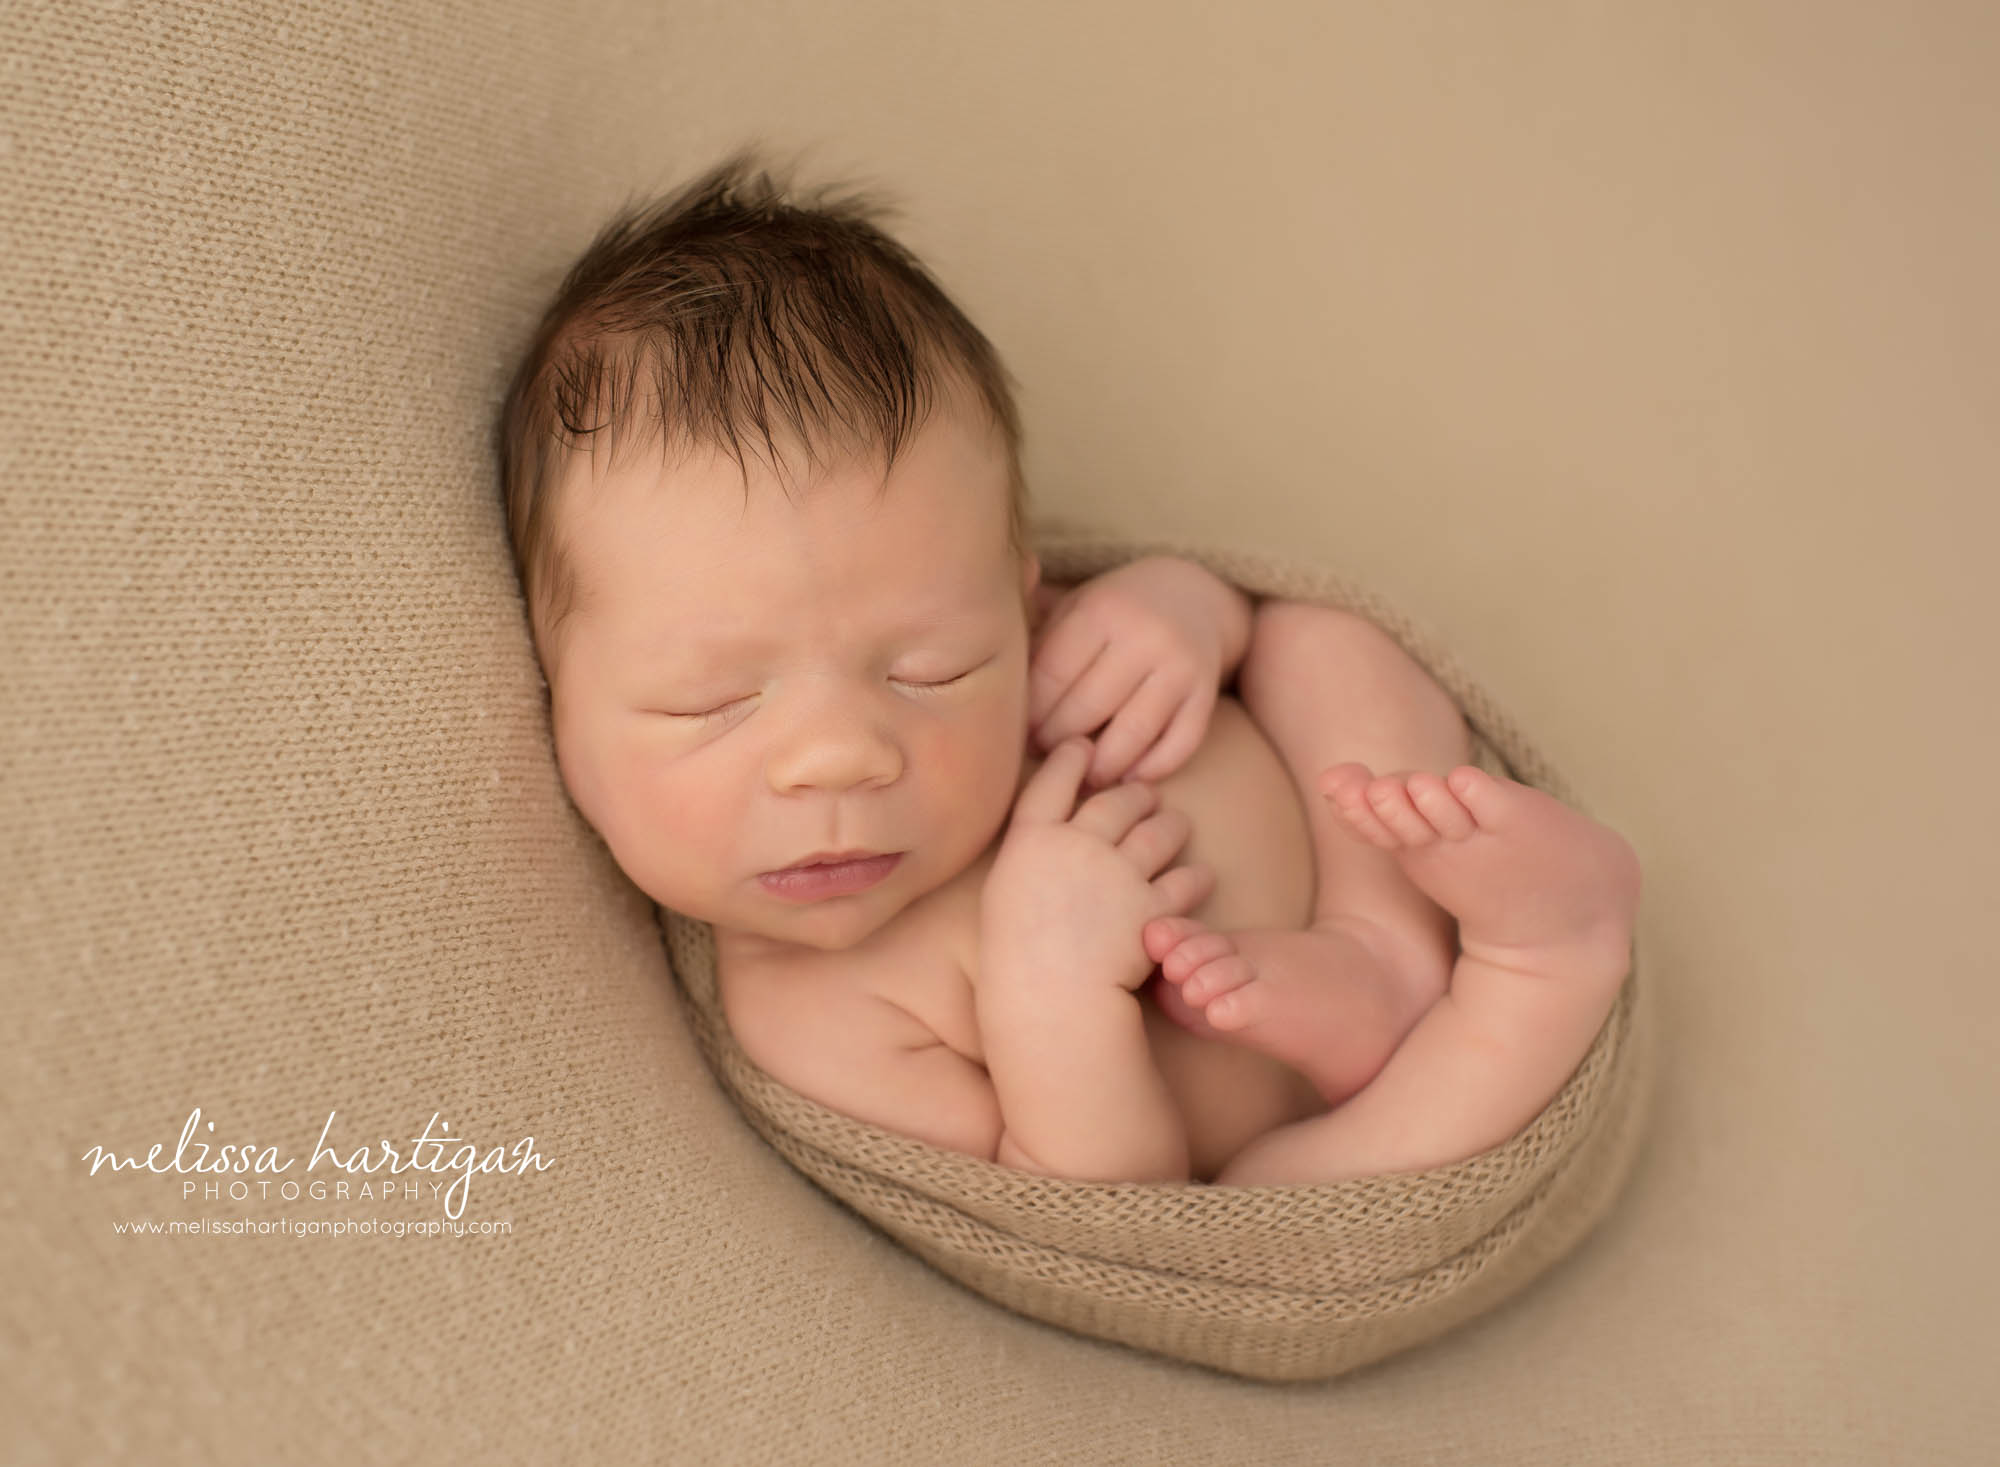 newborn baby boy posed on tan backdrop wrapped in knitted tan colored wrap Avon CT newborn photography 